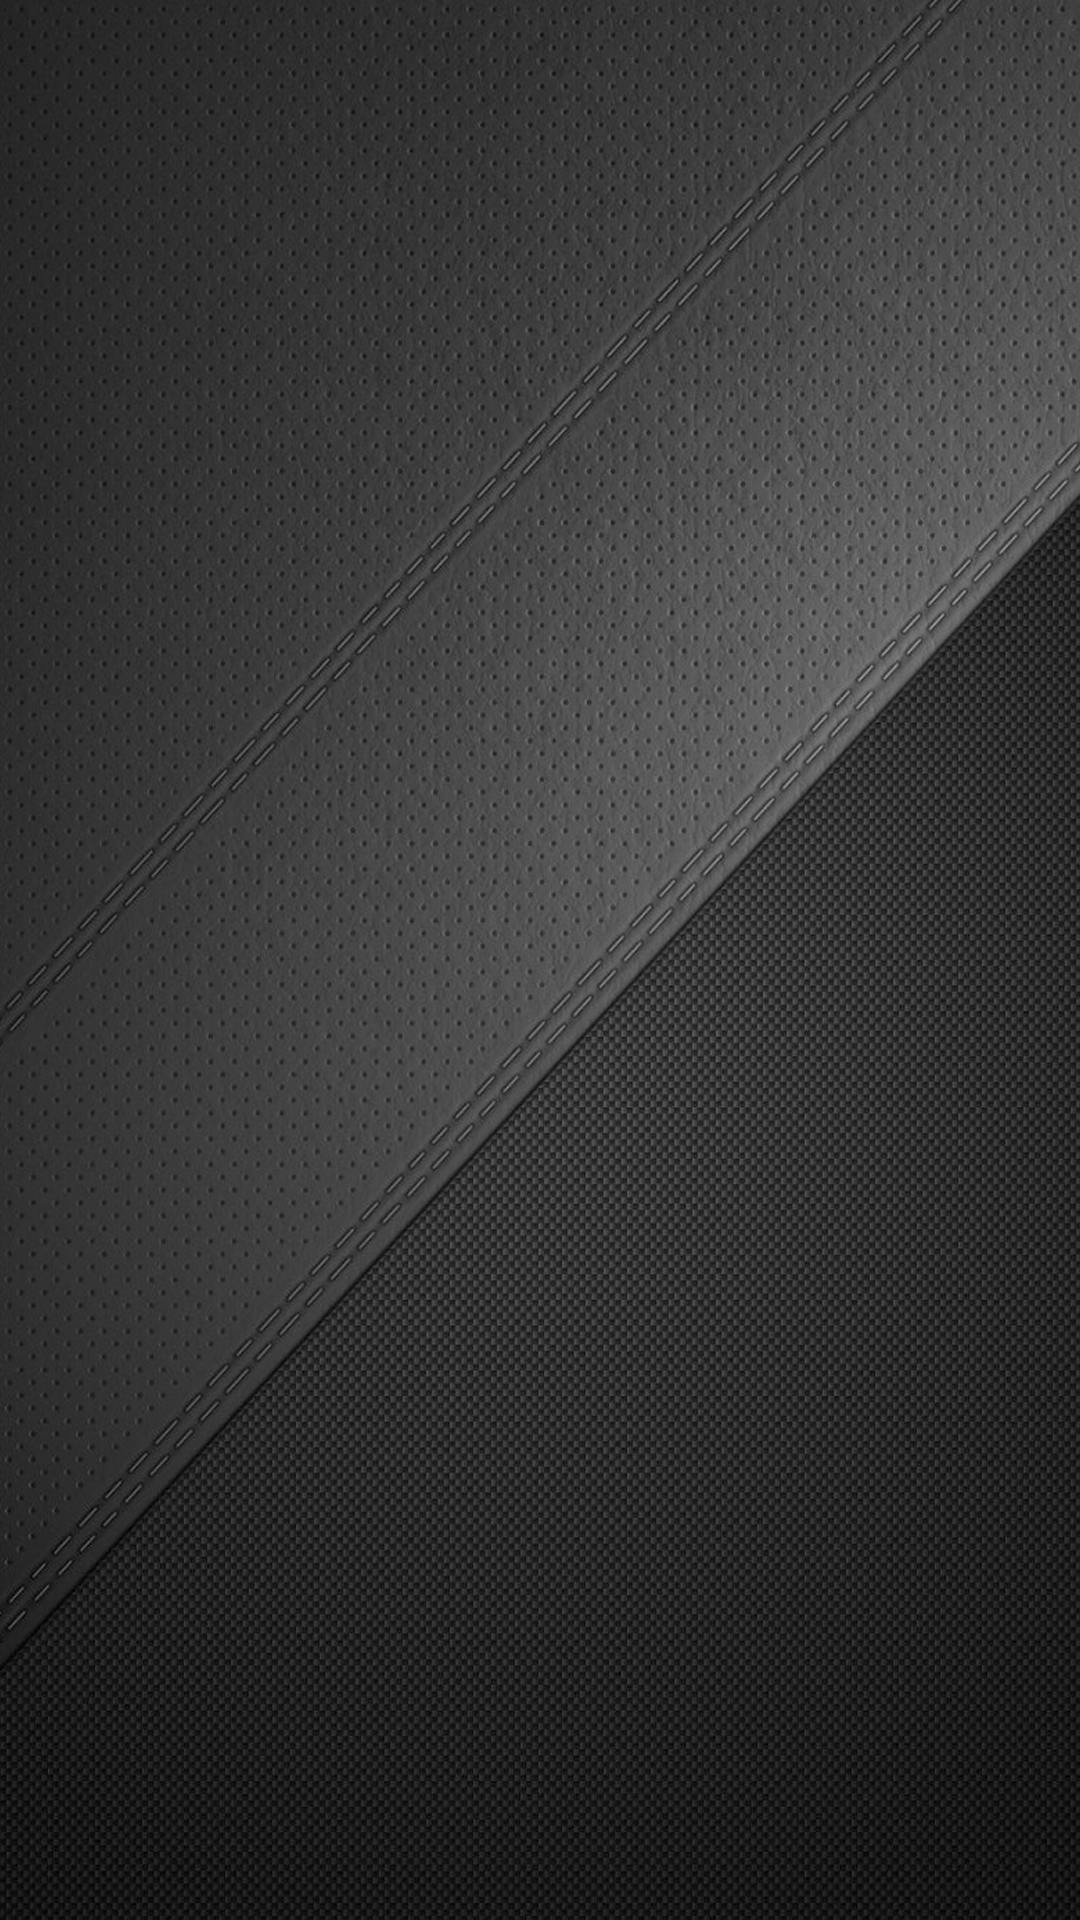 Black leather texture to download  ManyTextures